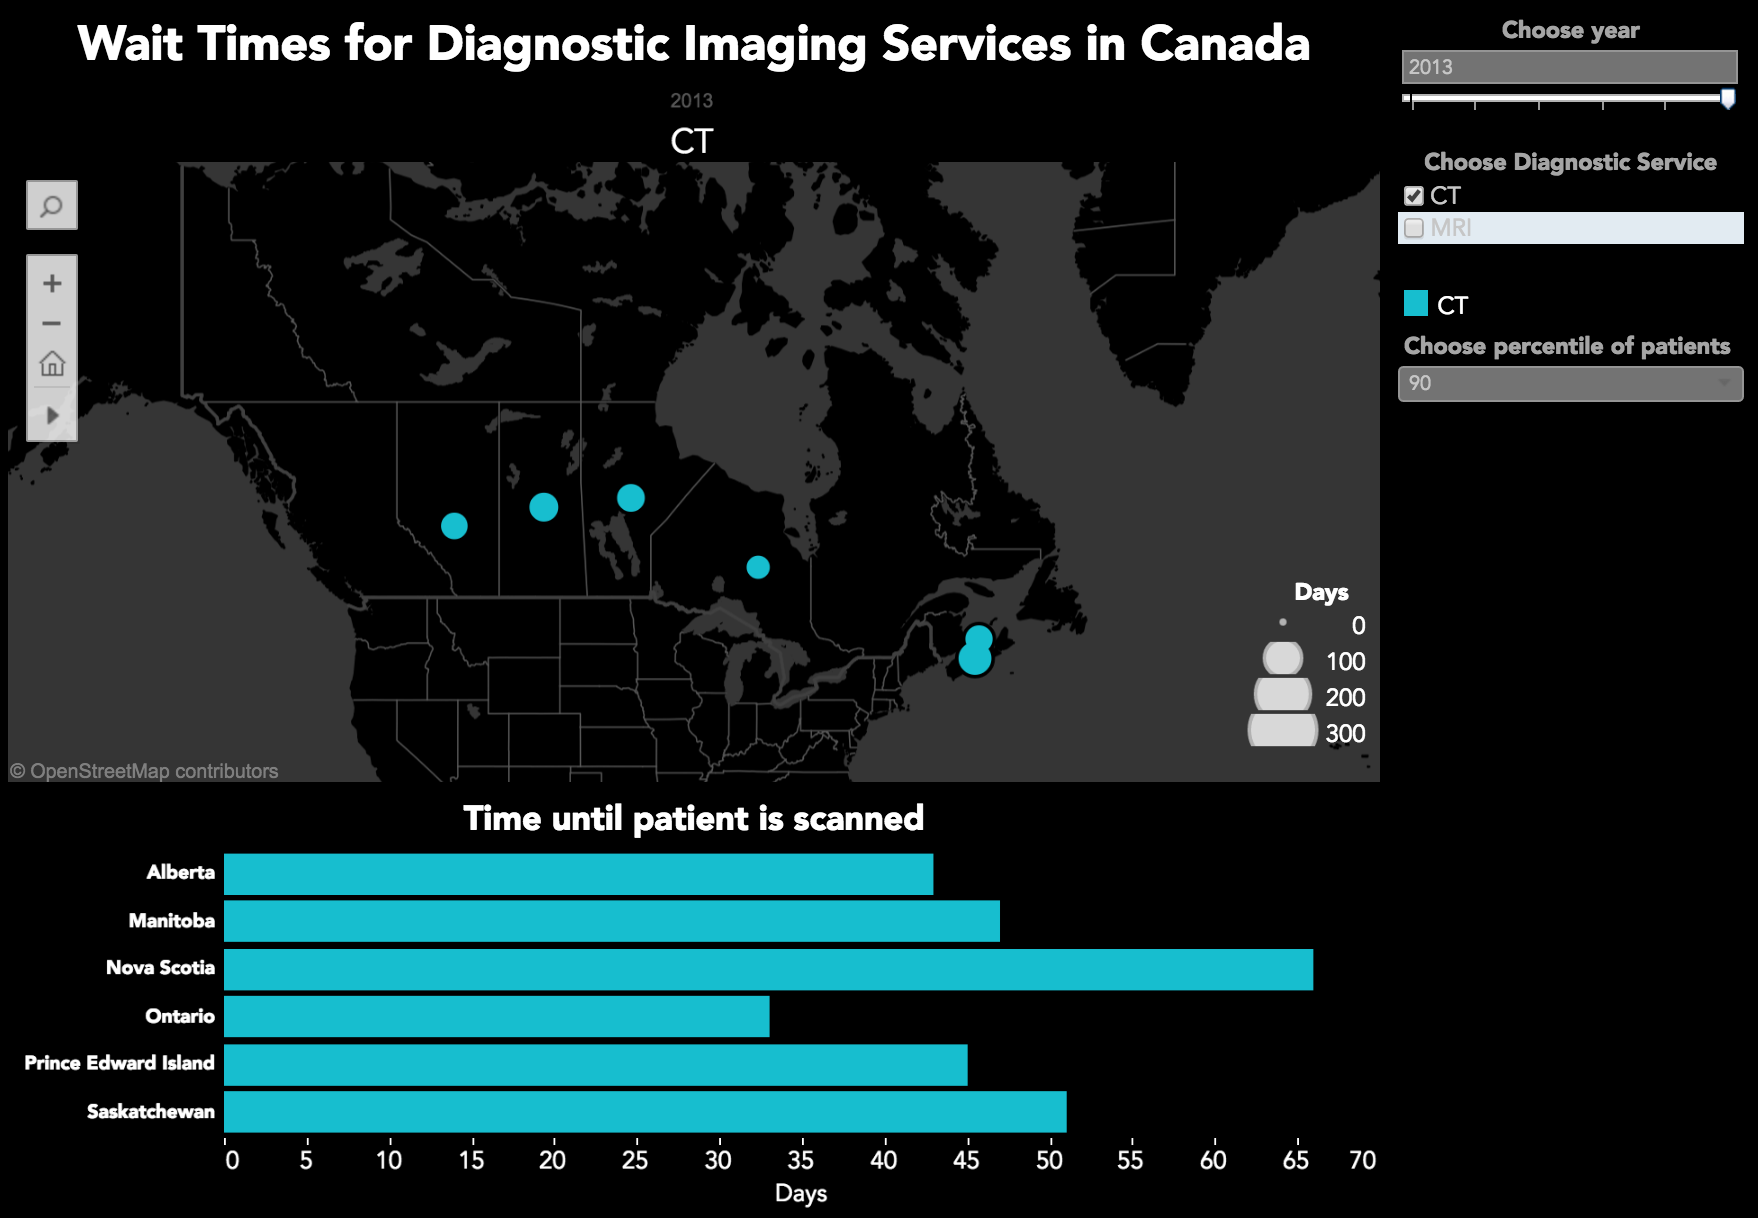 data visualization of wait times for CT scans across Canada